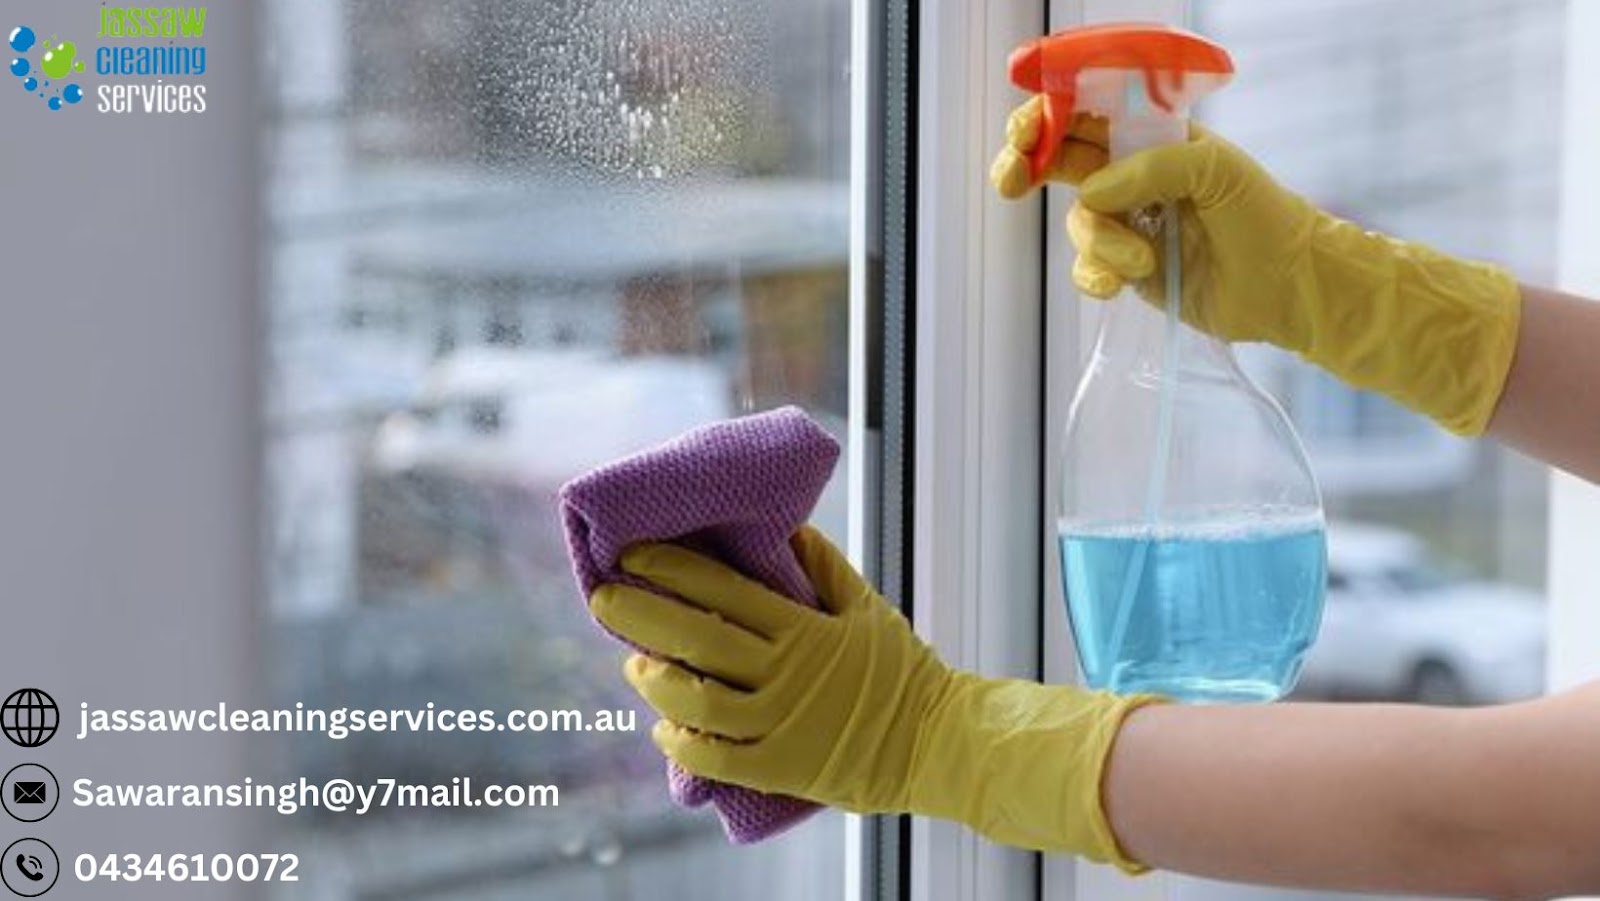 Premier Window Cleaning Services in Canberra and Queanbeyan